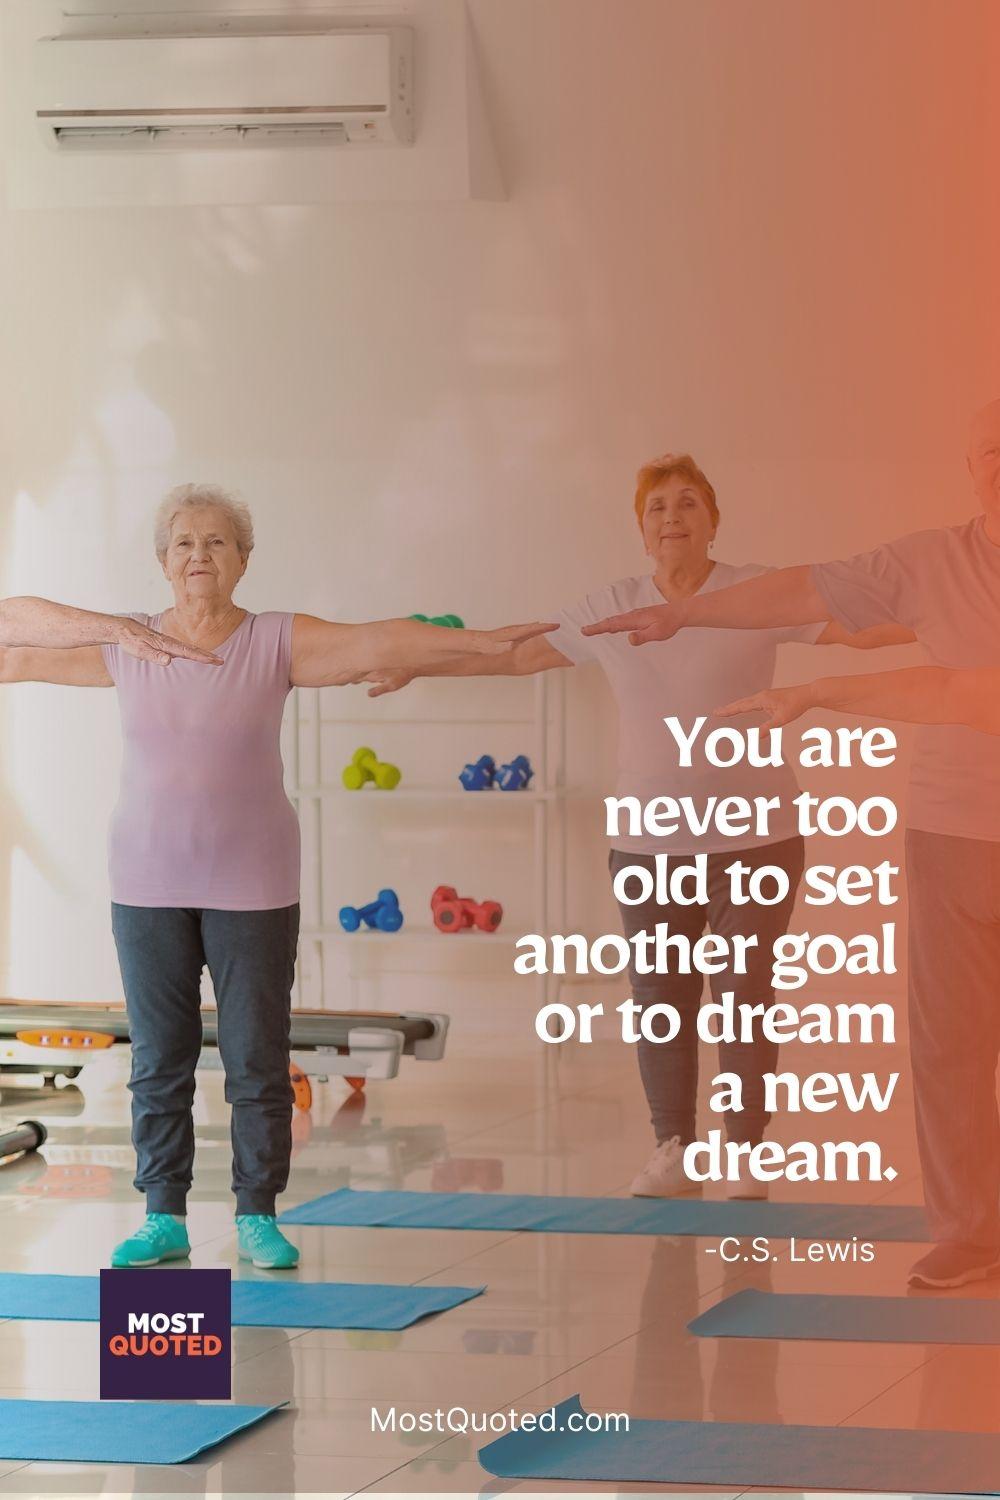 You are never too old to set another goal or to dream a new dream. - C.S. Lewis